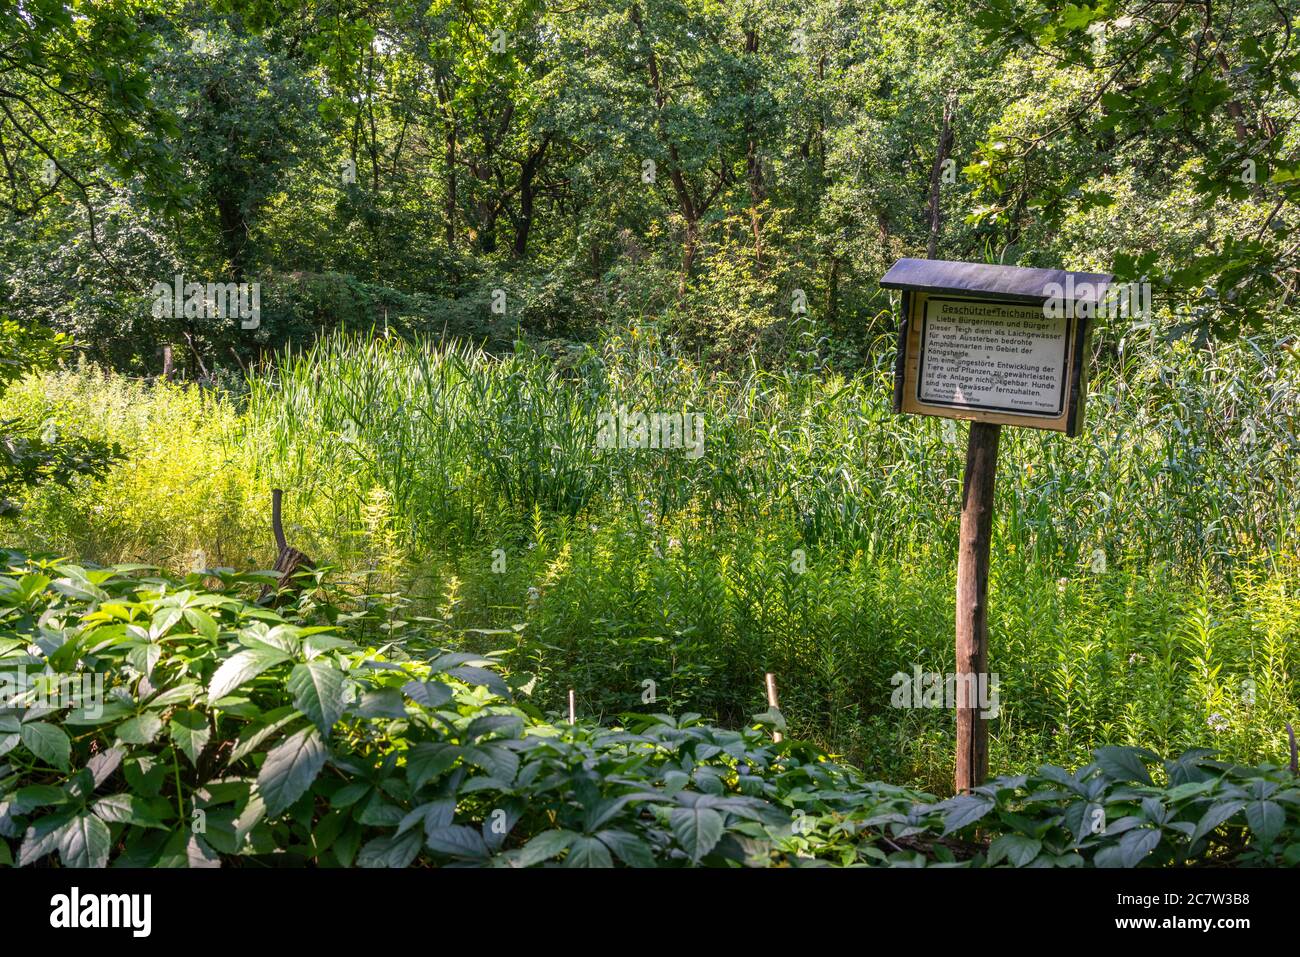 Königsheideteich a protected pond housing rare amphibians in the Königsheide a woodland area in Berlin, Germany, Europe Stock Photo